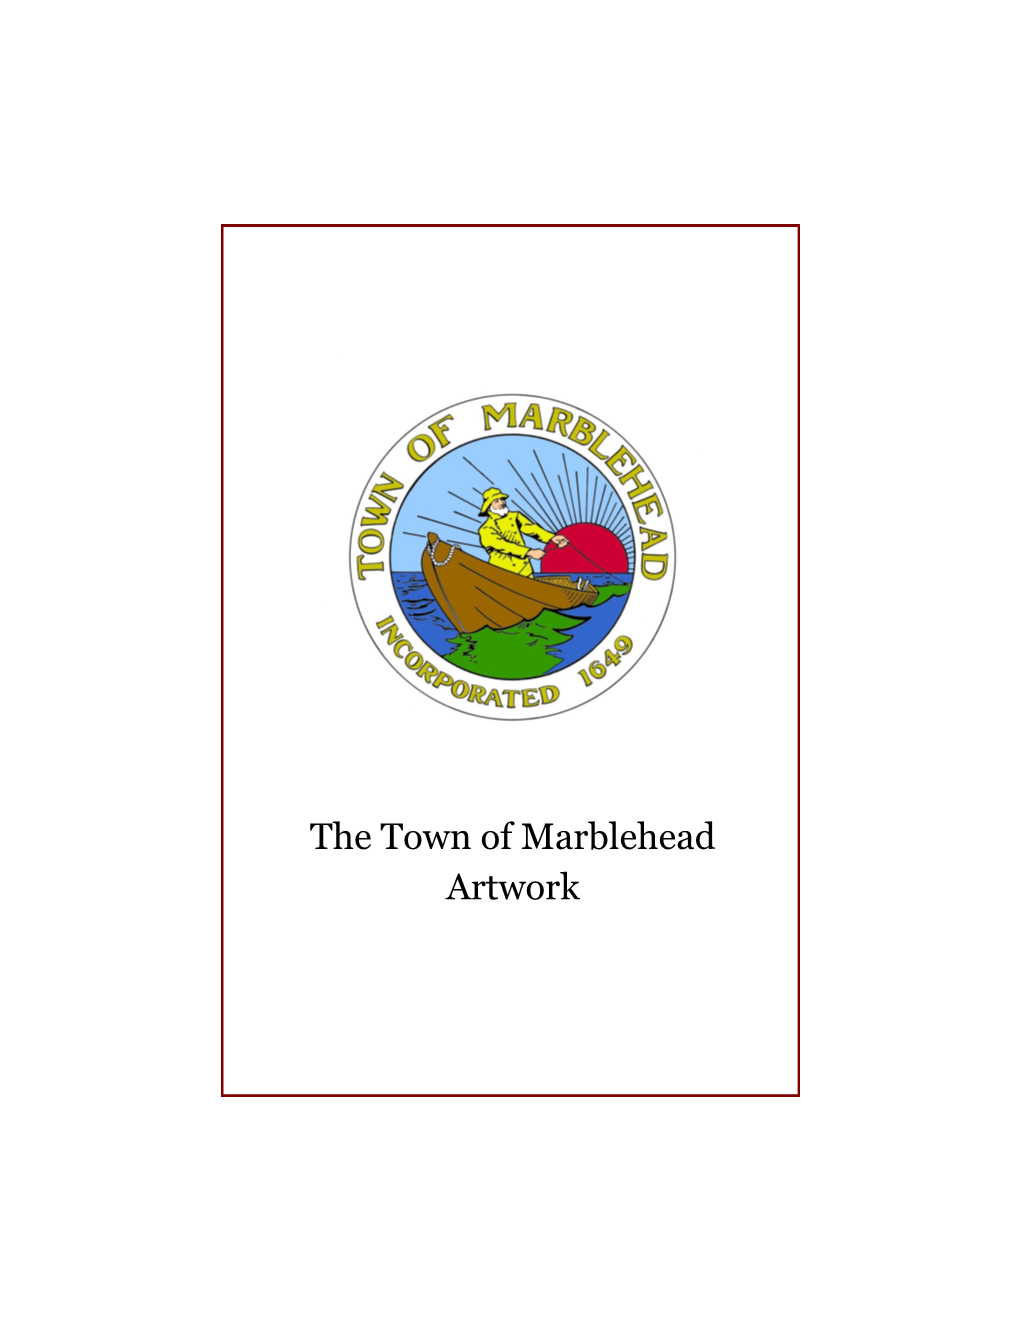 The Town of Marblehead Artwork